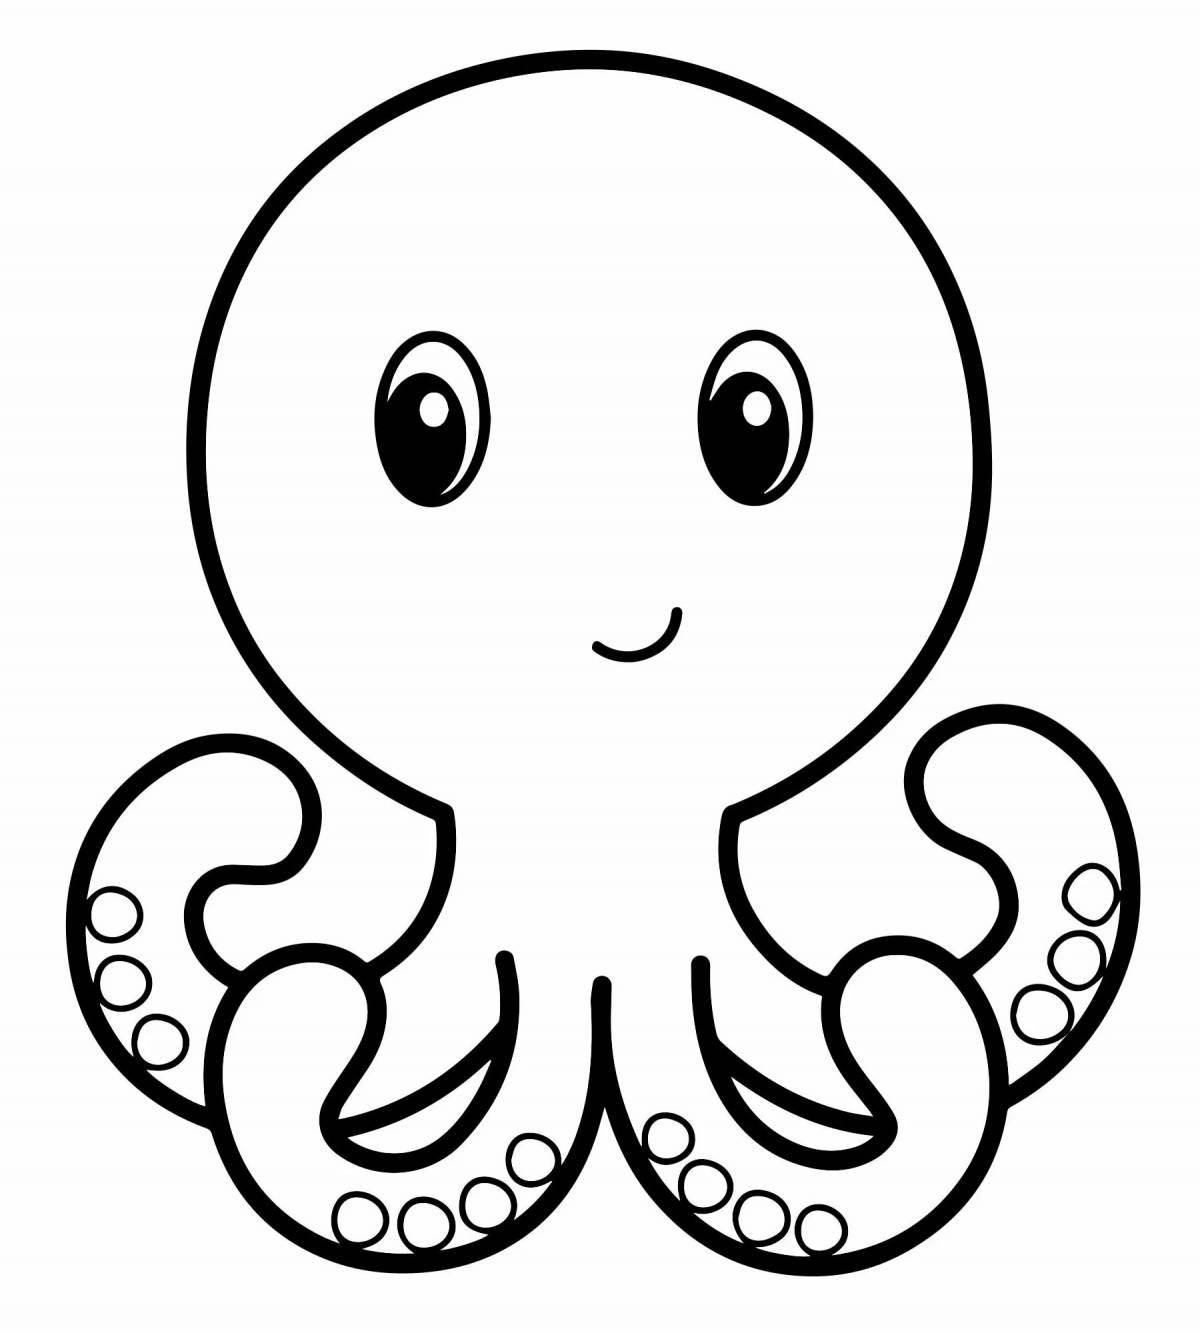 Colorful octopus coloring book for kids